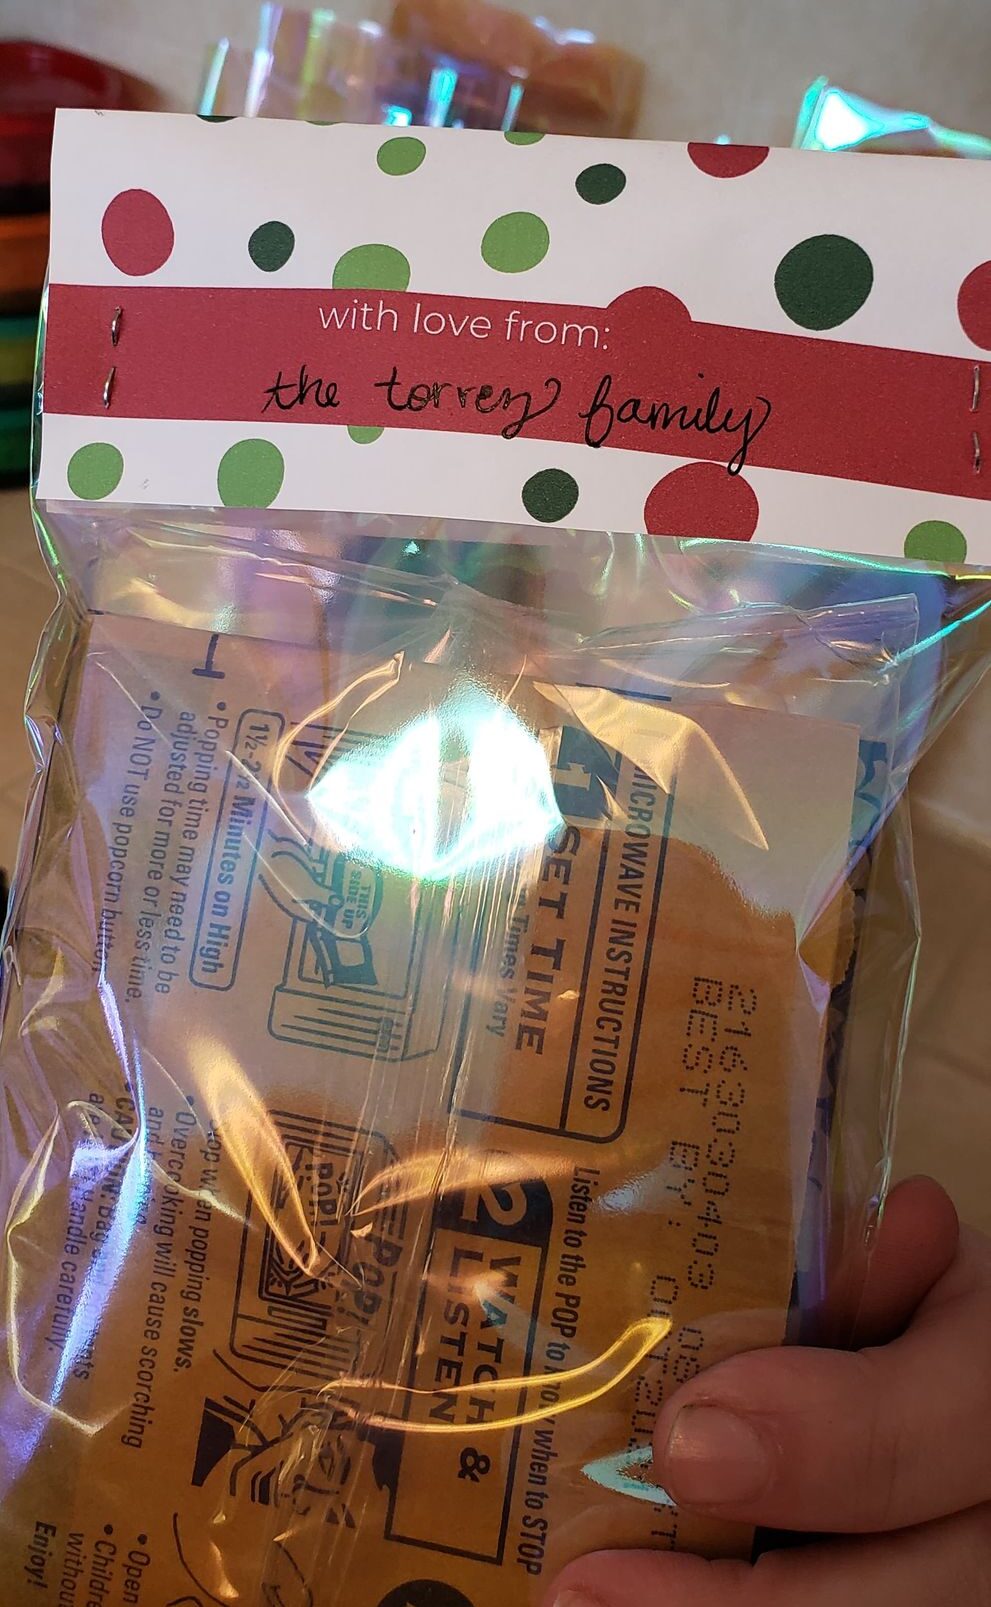 treat bags topped with paper reading "with love from the torrez family"